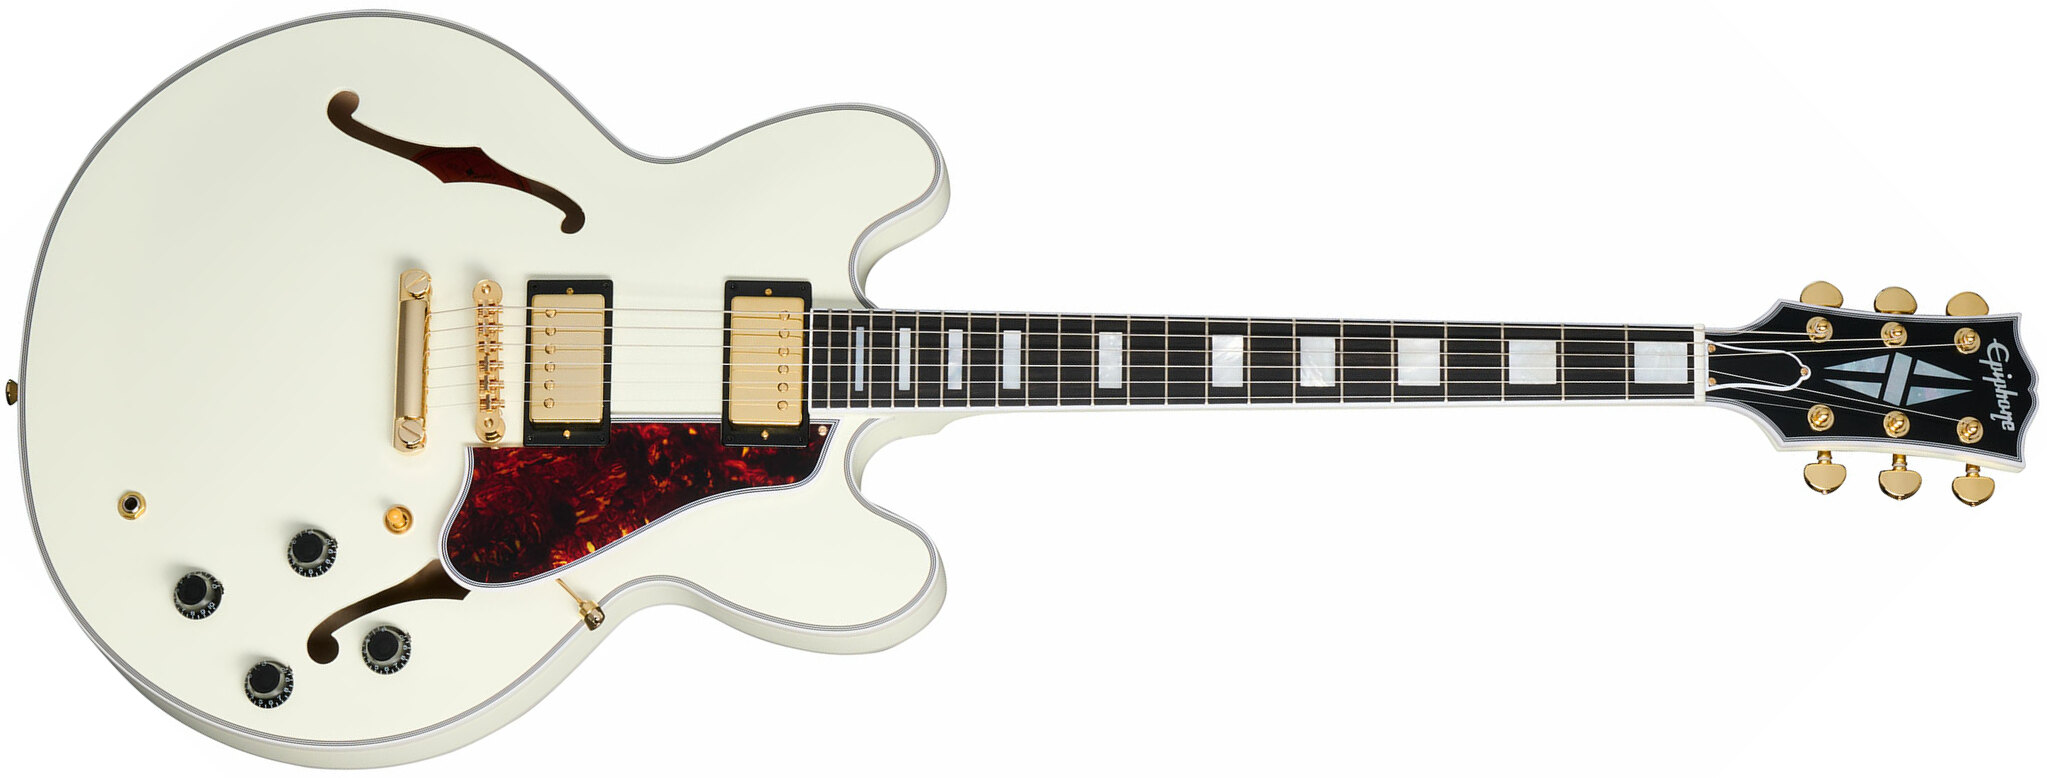 Epiphone Es355 1959 Inspired By 2h Gibson Ht Eb - Vos Classic White - Guitare Électrique 1/2 Caisse - Main picture